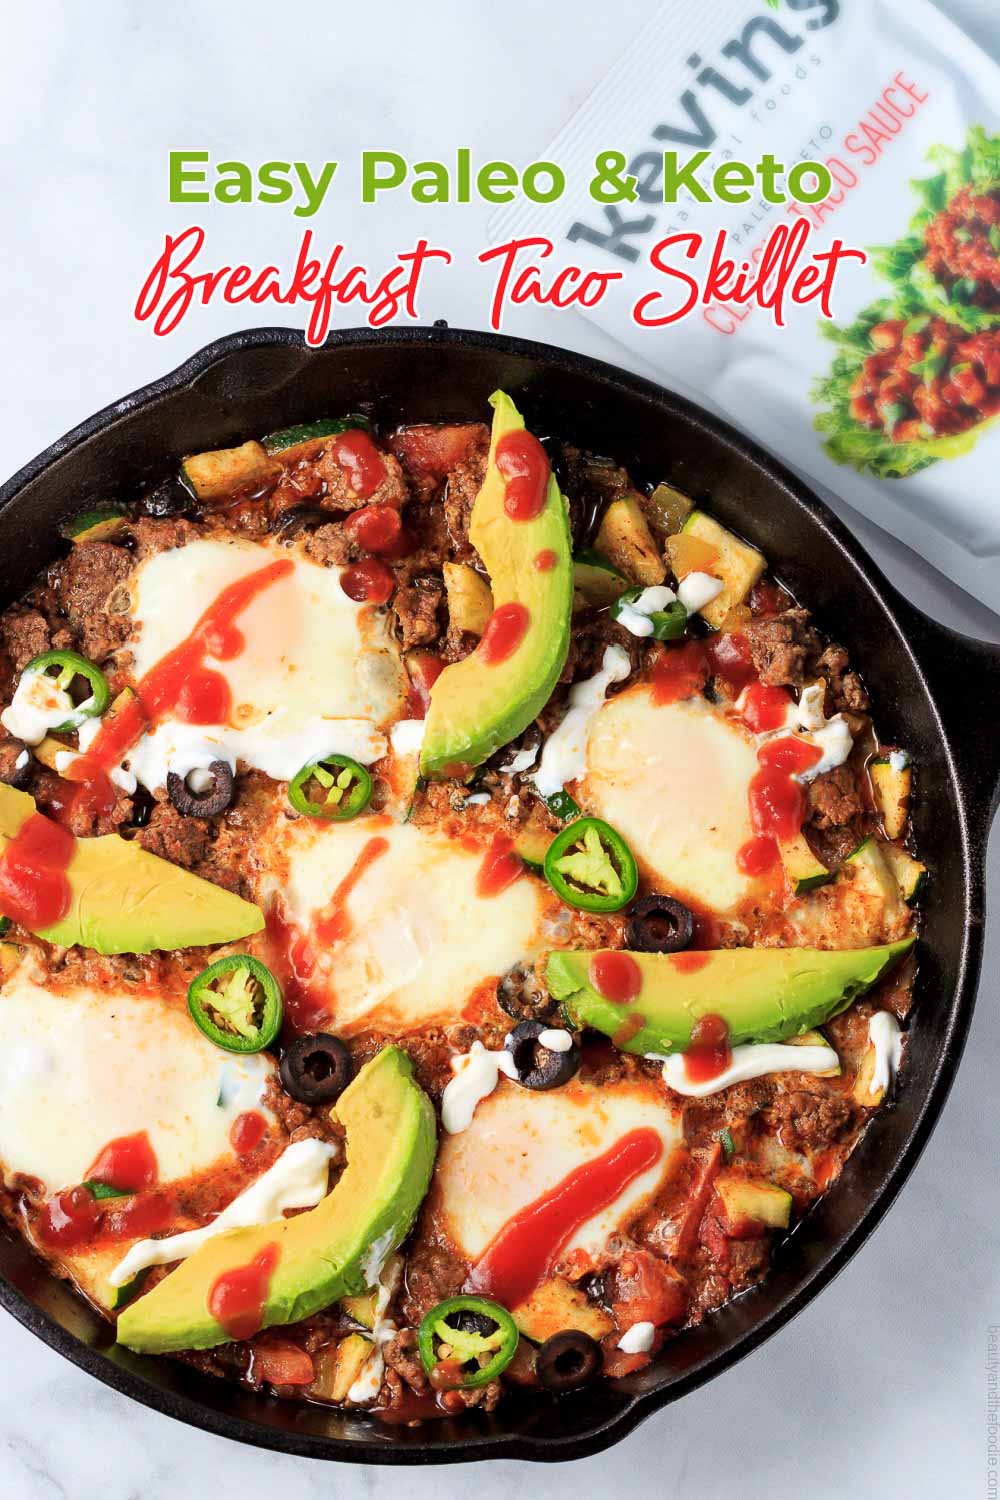 A Mexican breakfast skillet with eggs.